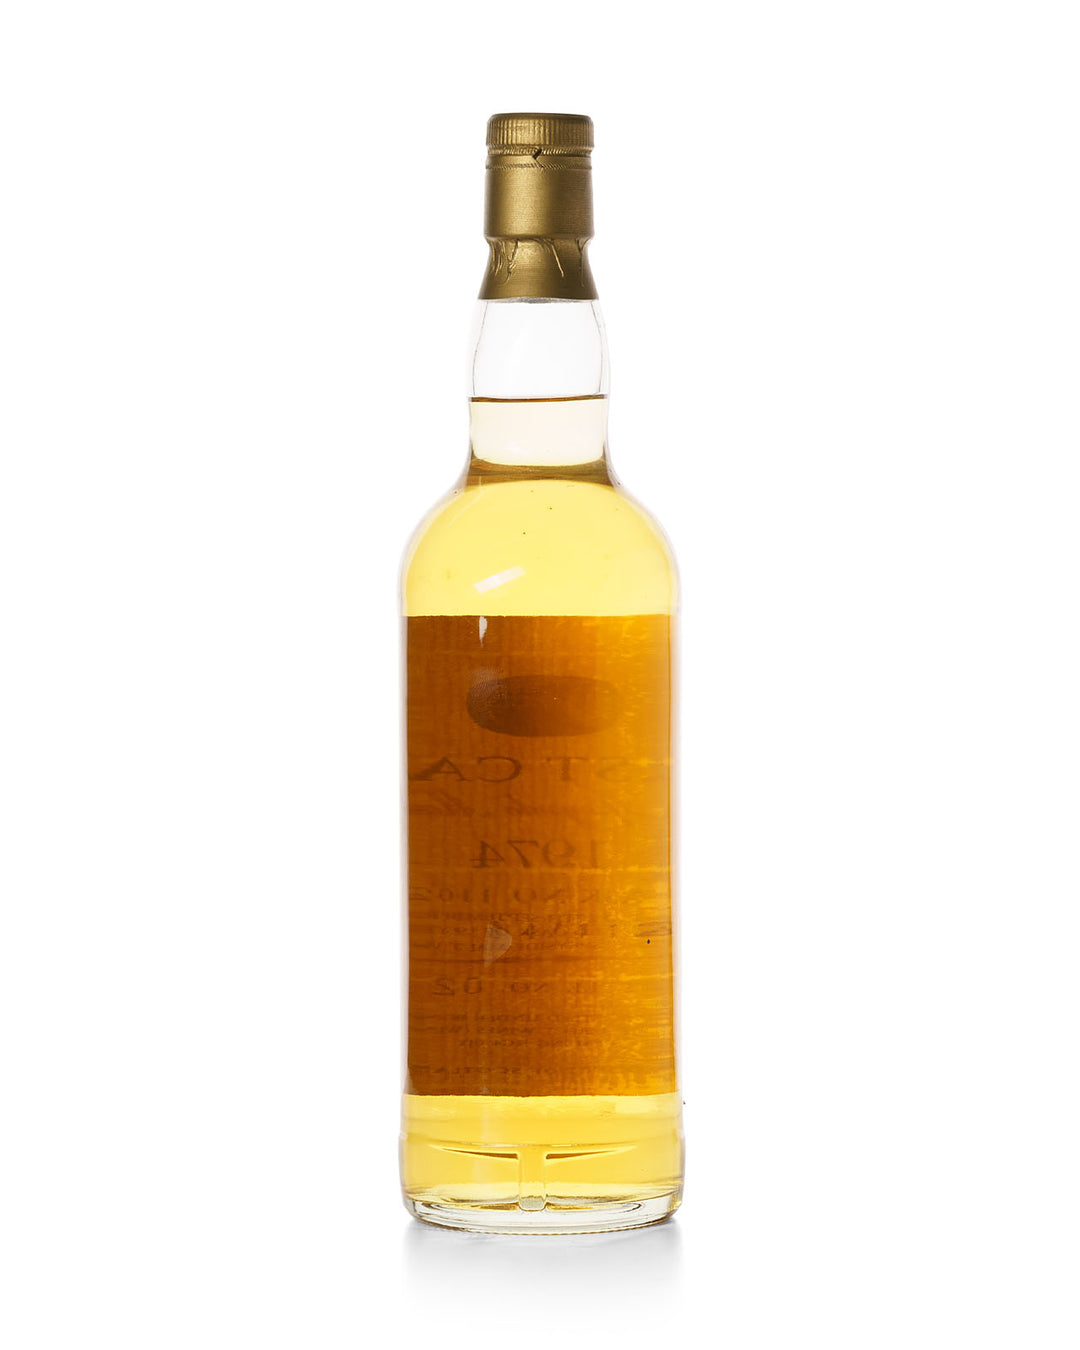 Aberlour First Cask 1974 - 19 Year Old - Bottled in 1993